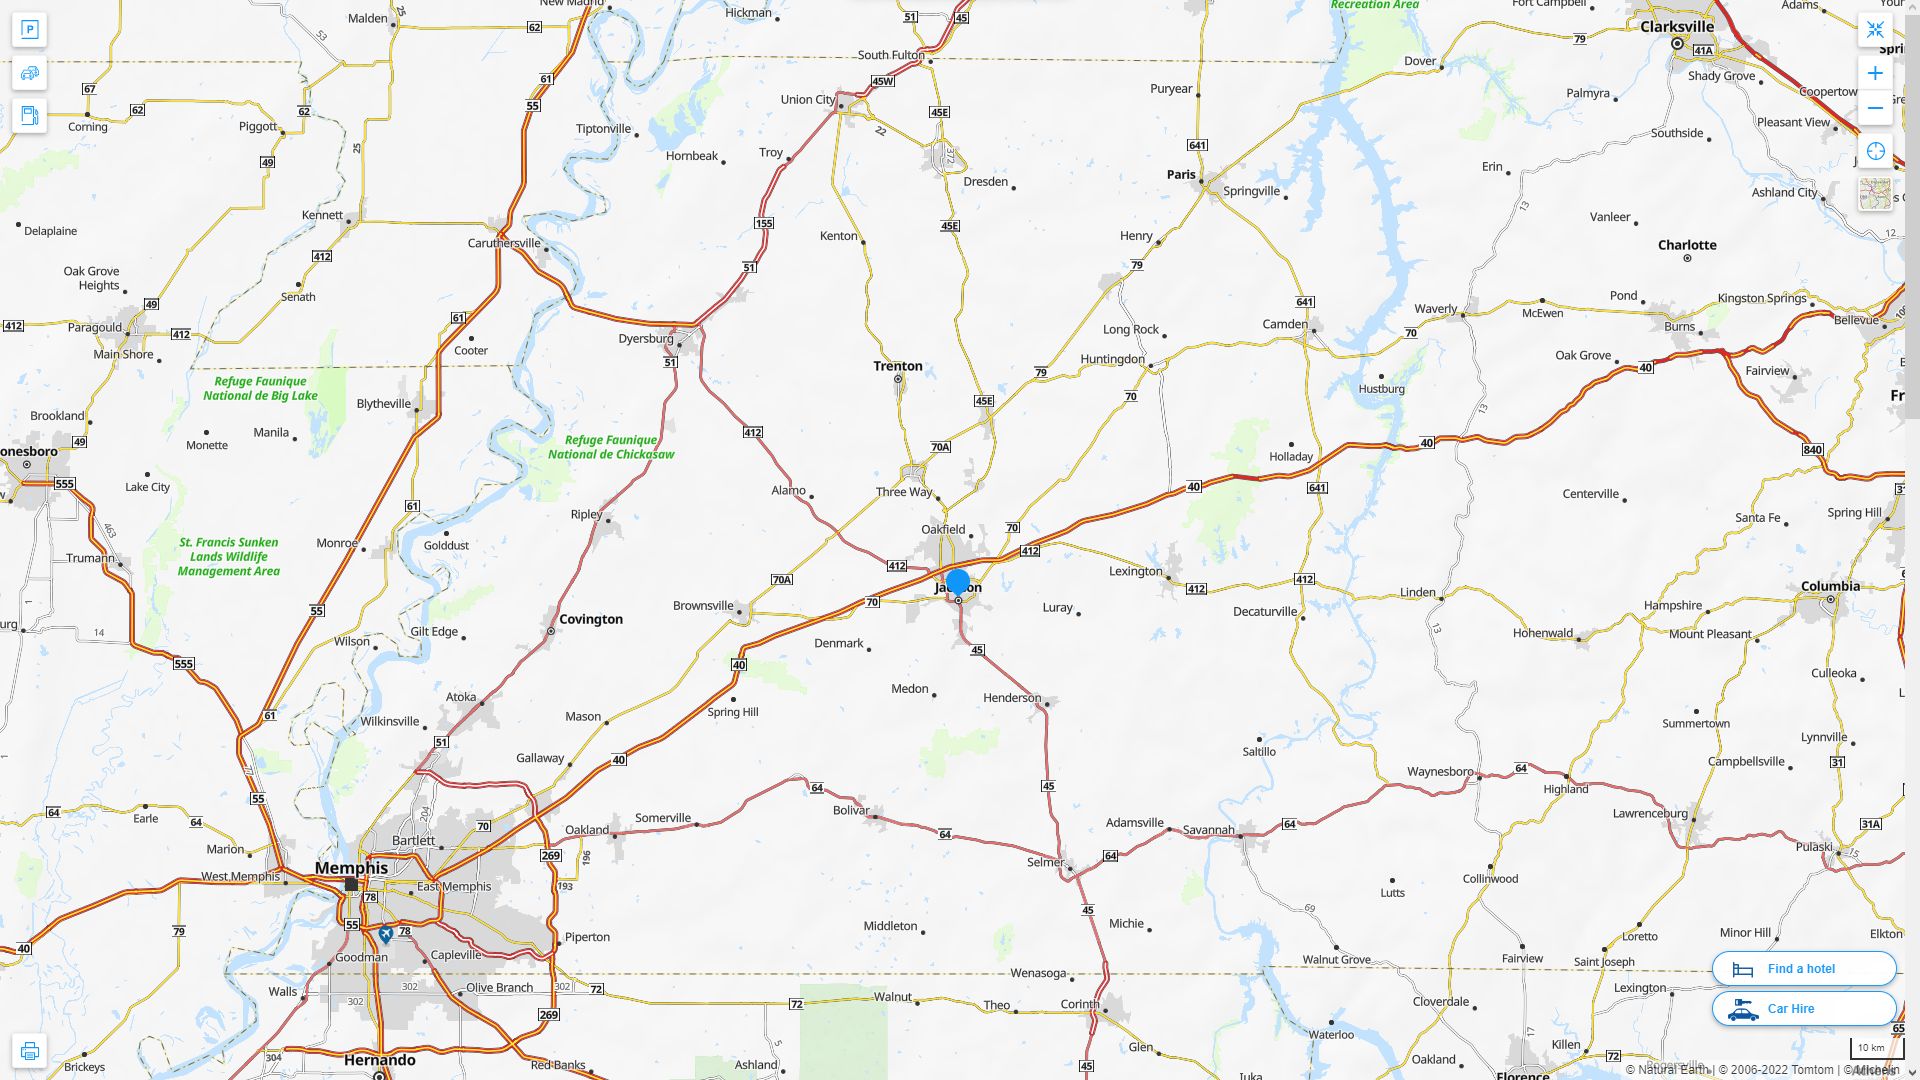 Jackson Tennessee Highway and Road Map